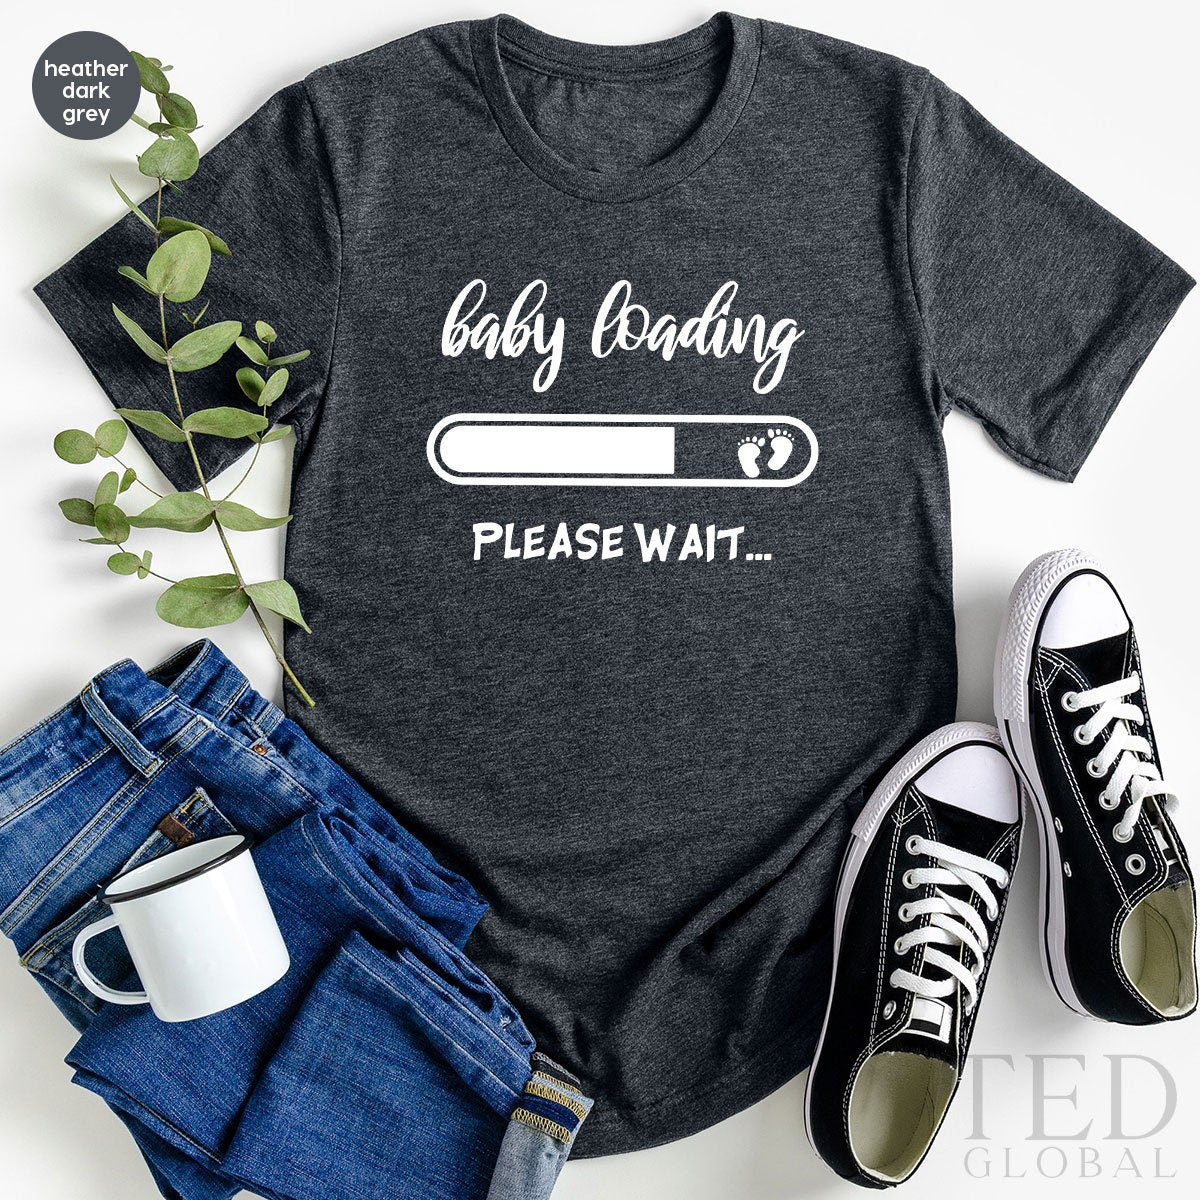 maternitytees Pregnancy T-Shirt Funny Maternity T-Shirt with Sayings Birth Announcement T-Shirt Funny Pregnancy T-shirts